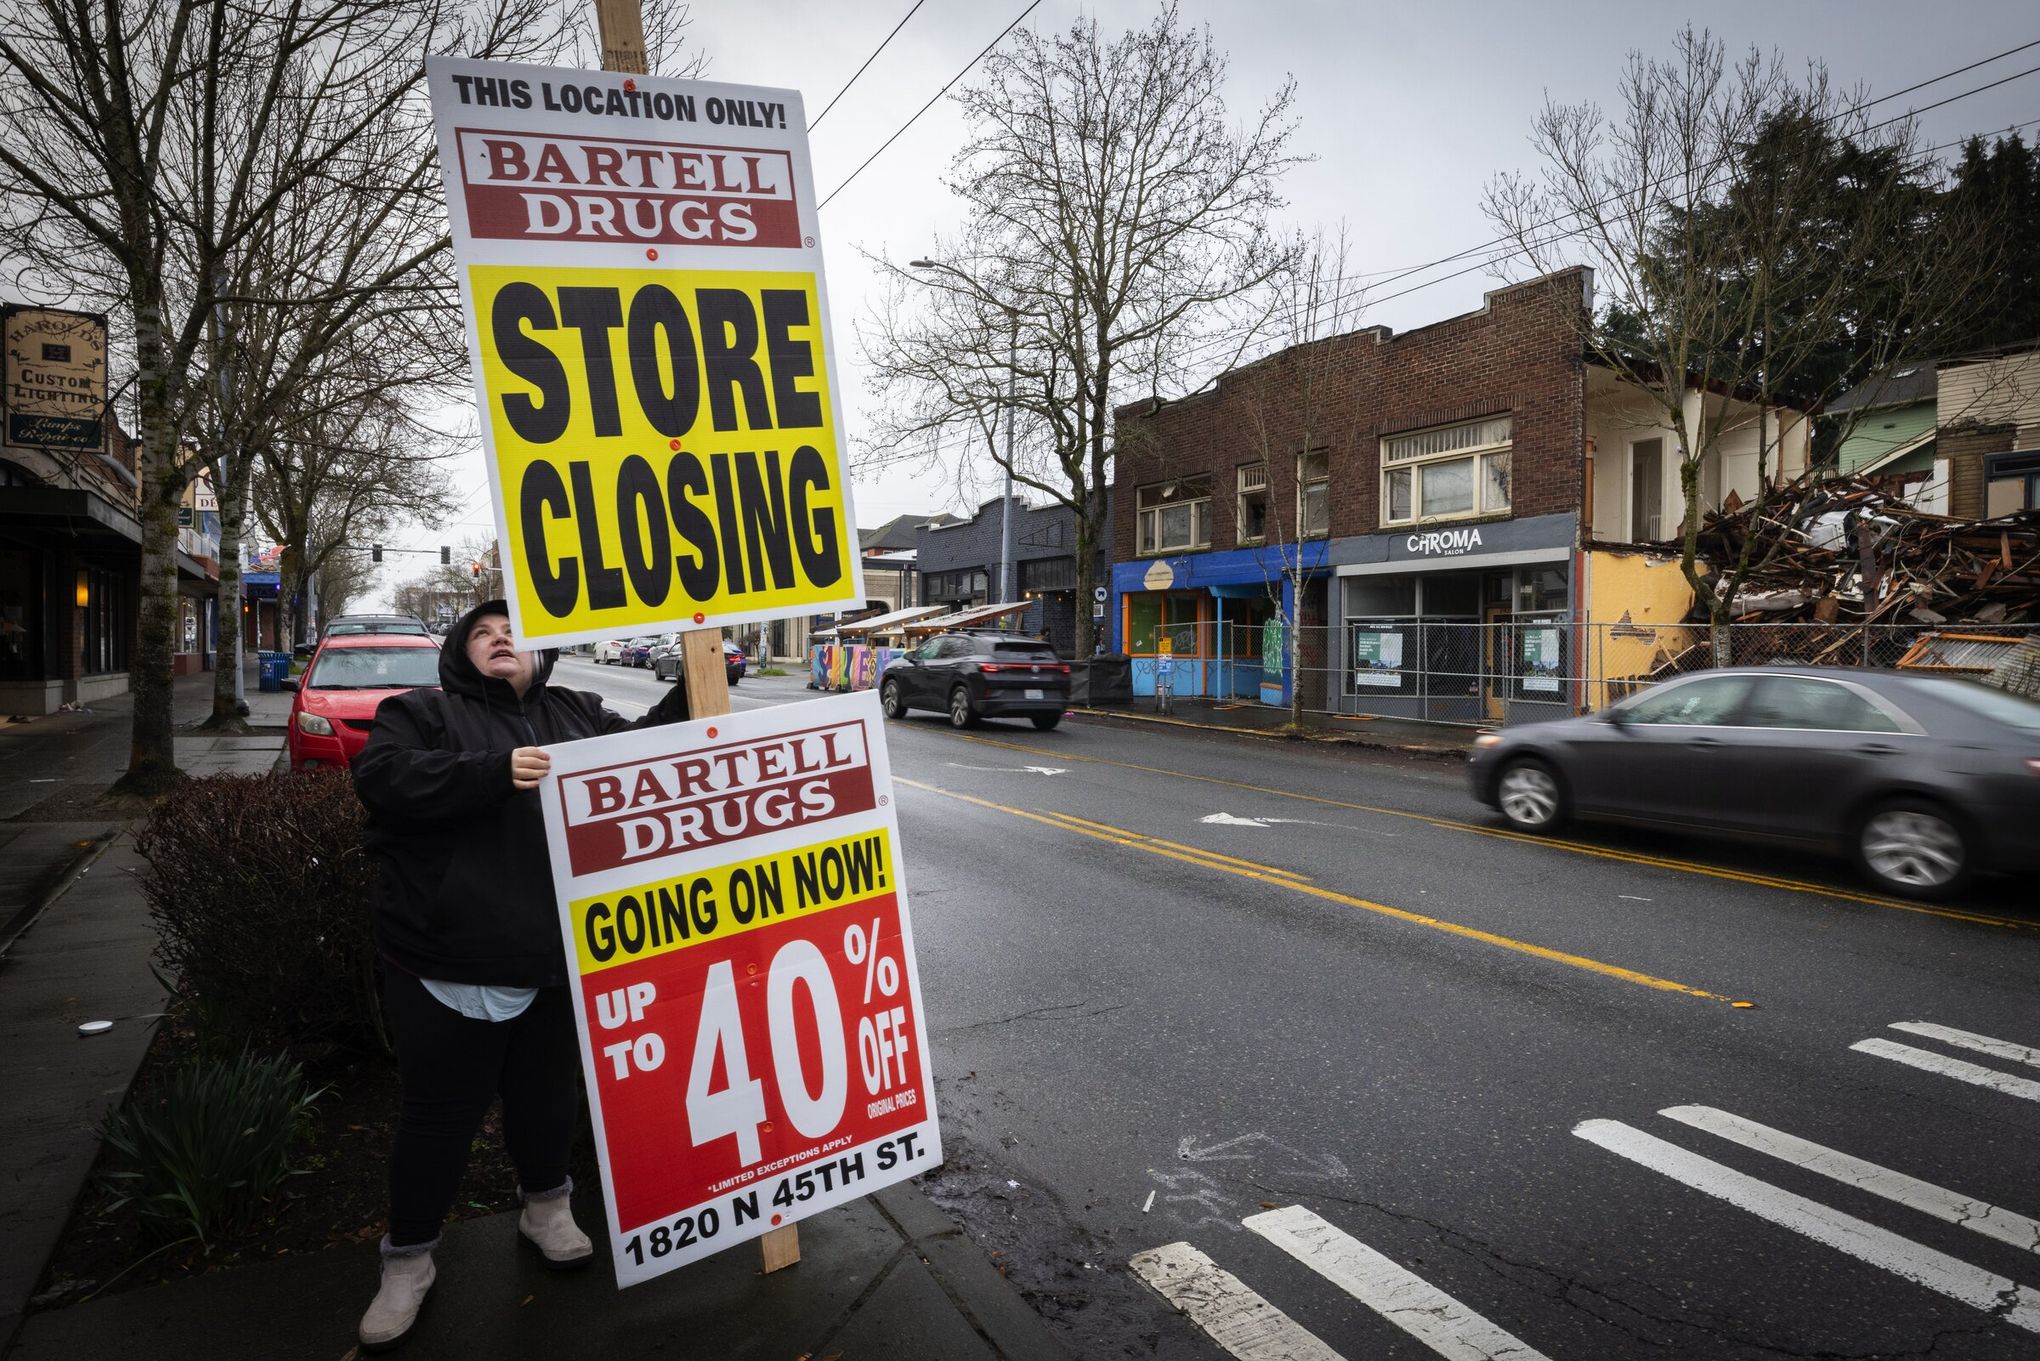 Rite Aid hires liquidators while talks with possible buyers drag